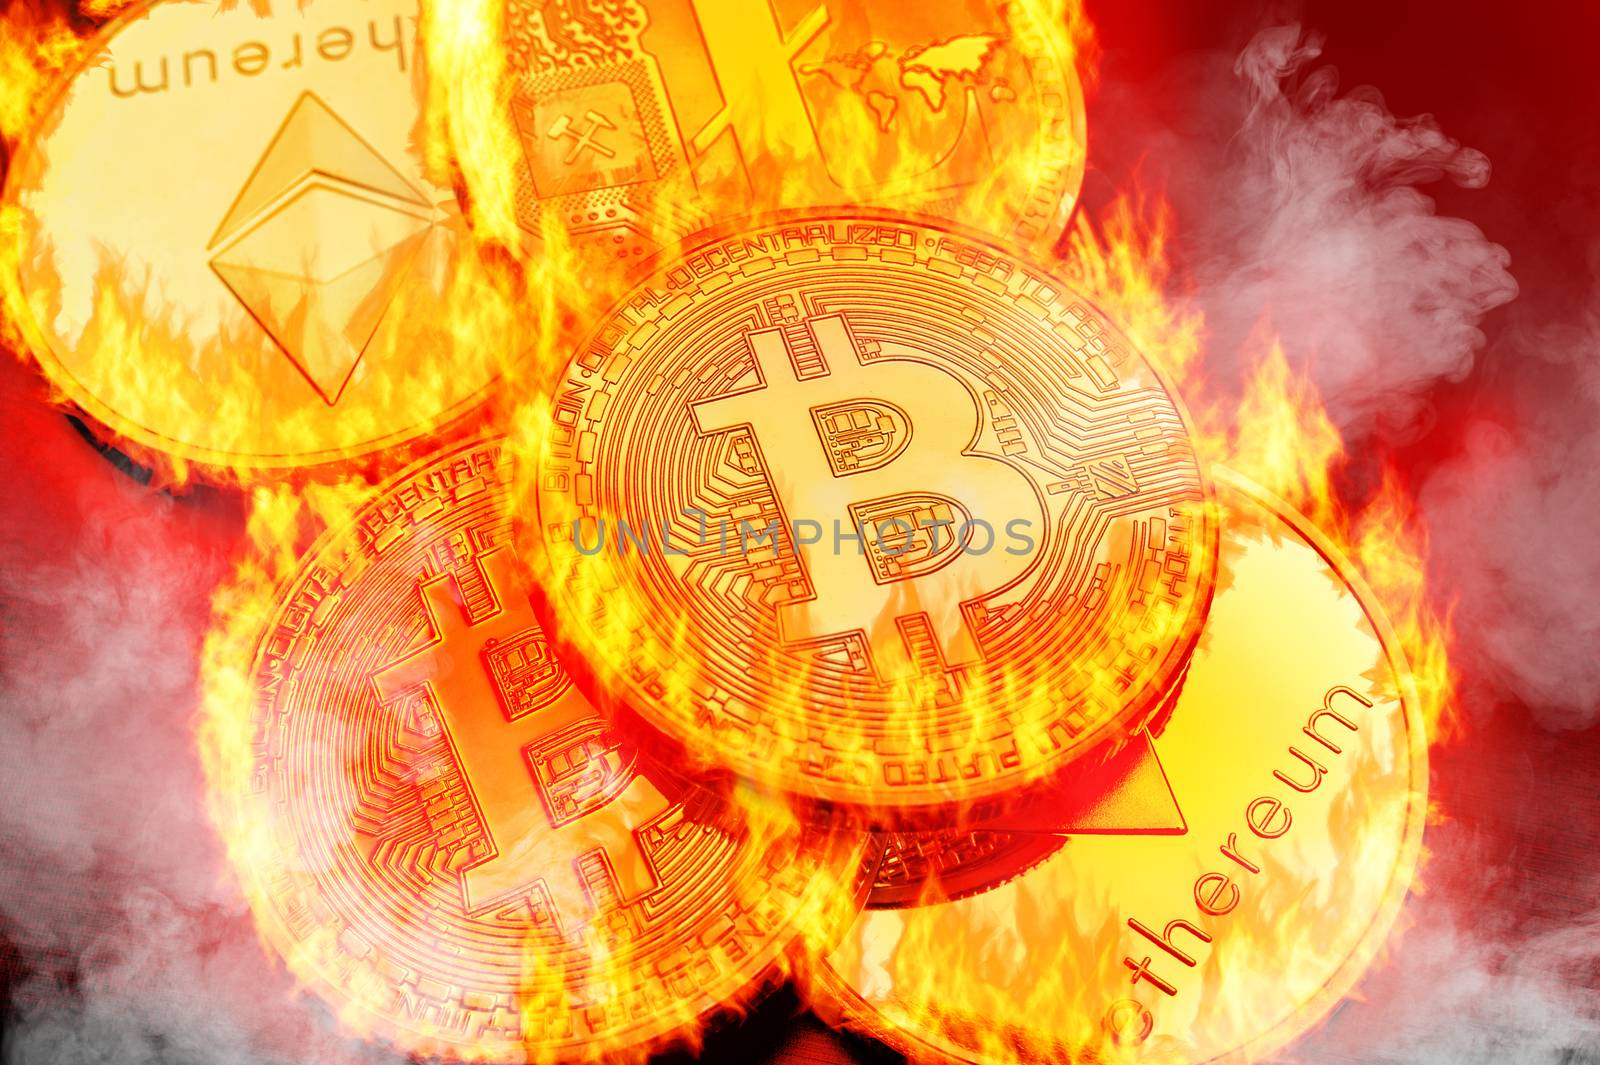 Conceptual picture of cryptocurrency coins bursting into flammes, illustrating crypto-currency market crash